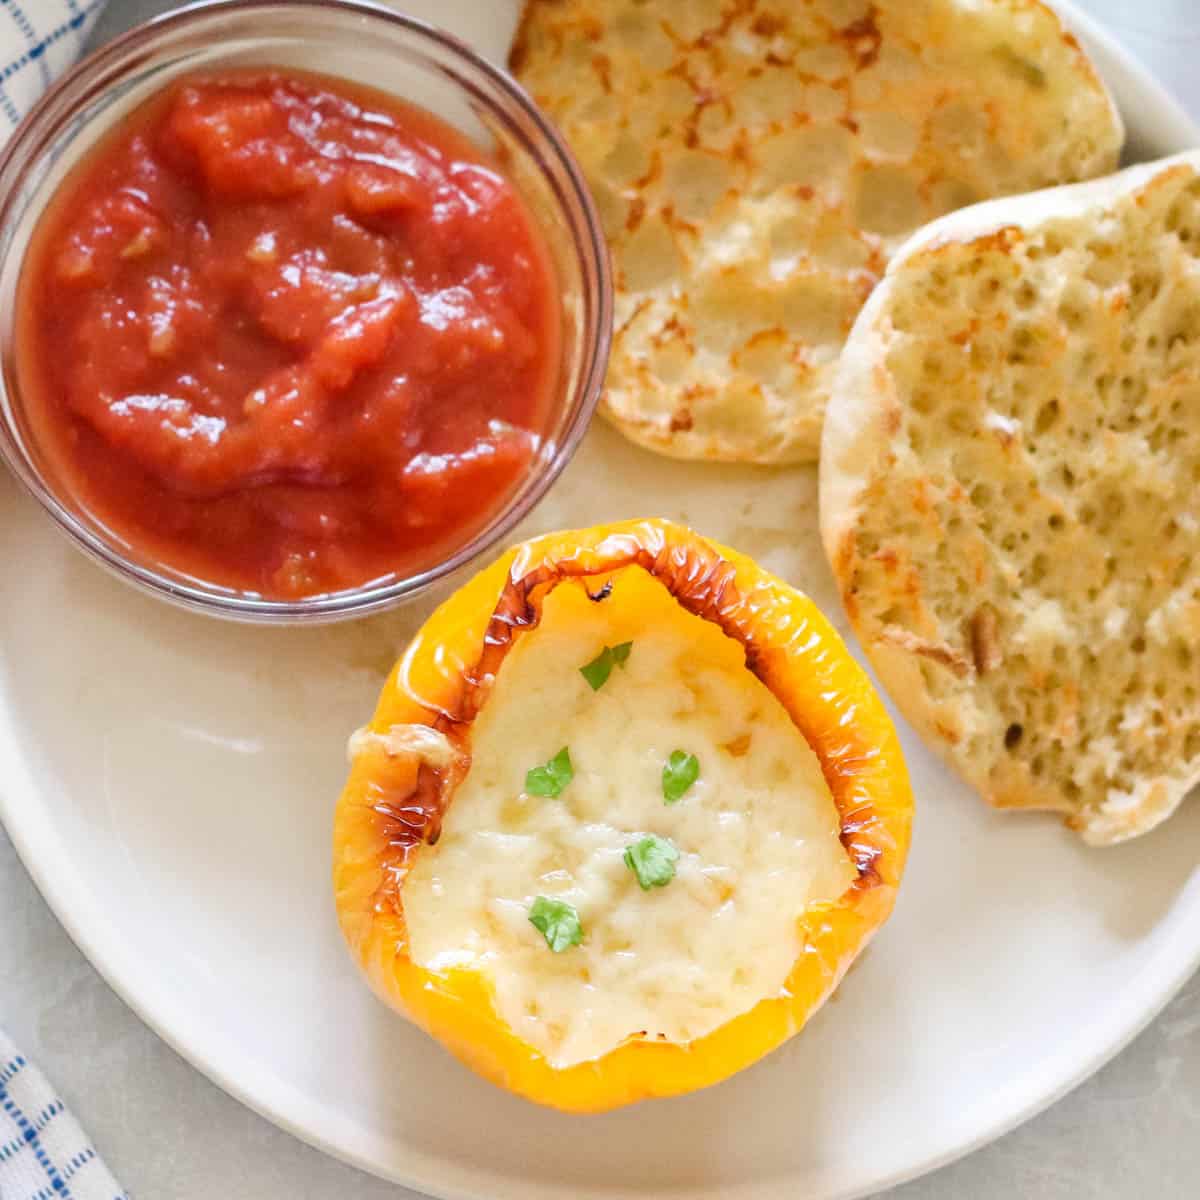 plate with a bowl of salsa, english muffin, and yellow breakfast stuffed pepper.